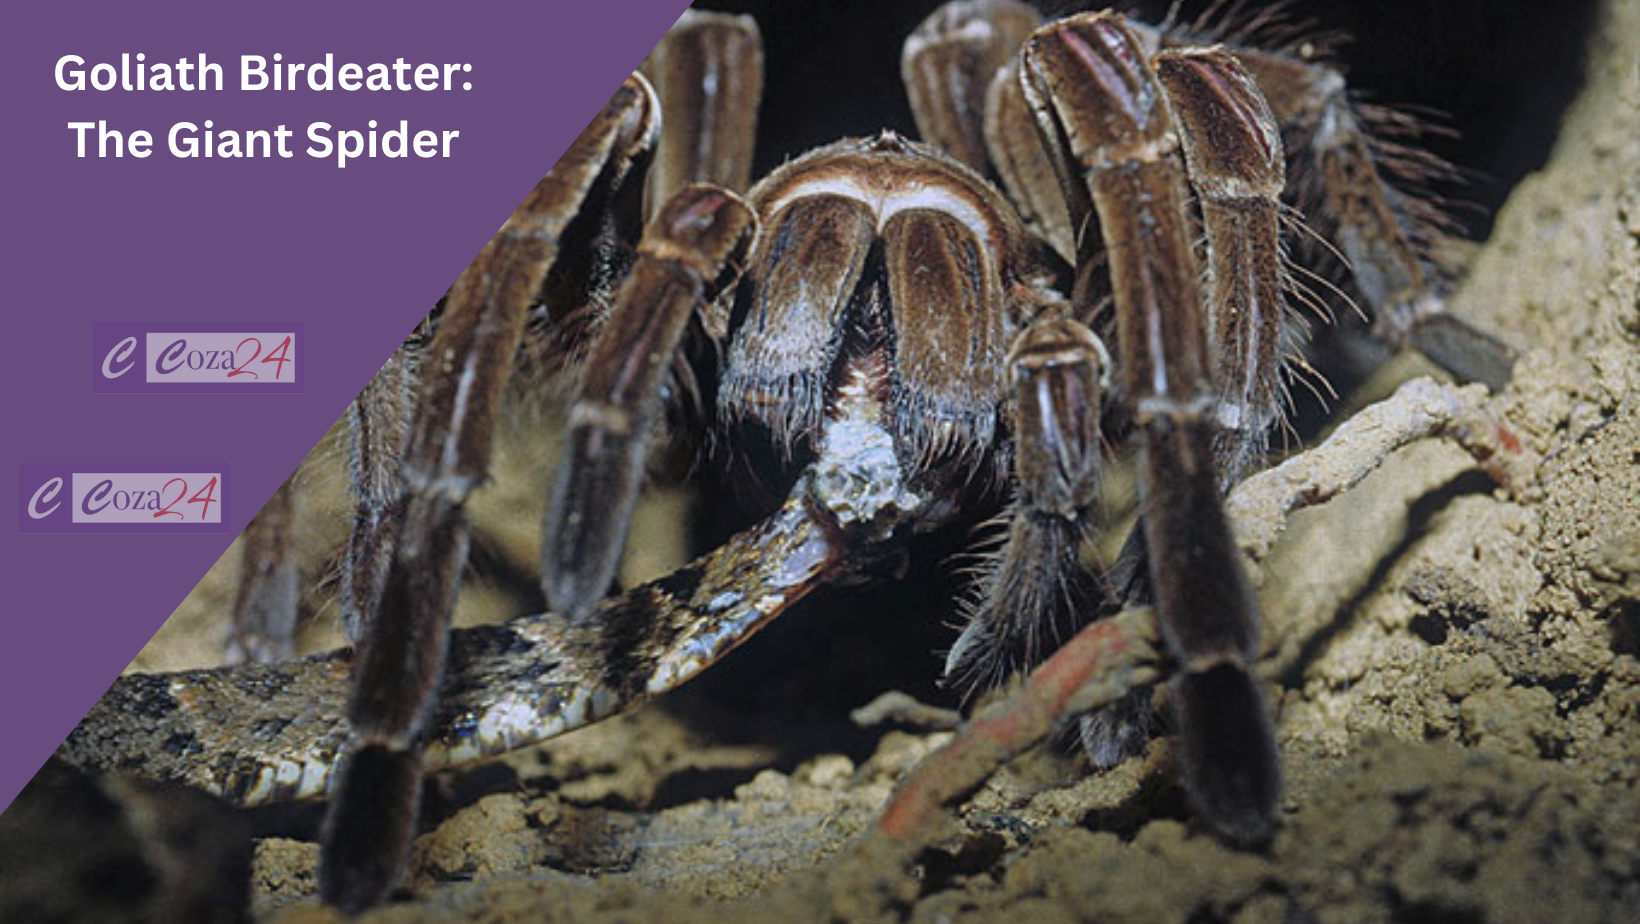 Goliath Birdeater: The Giant Spider